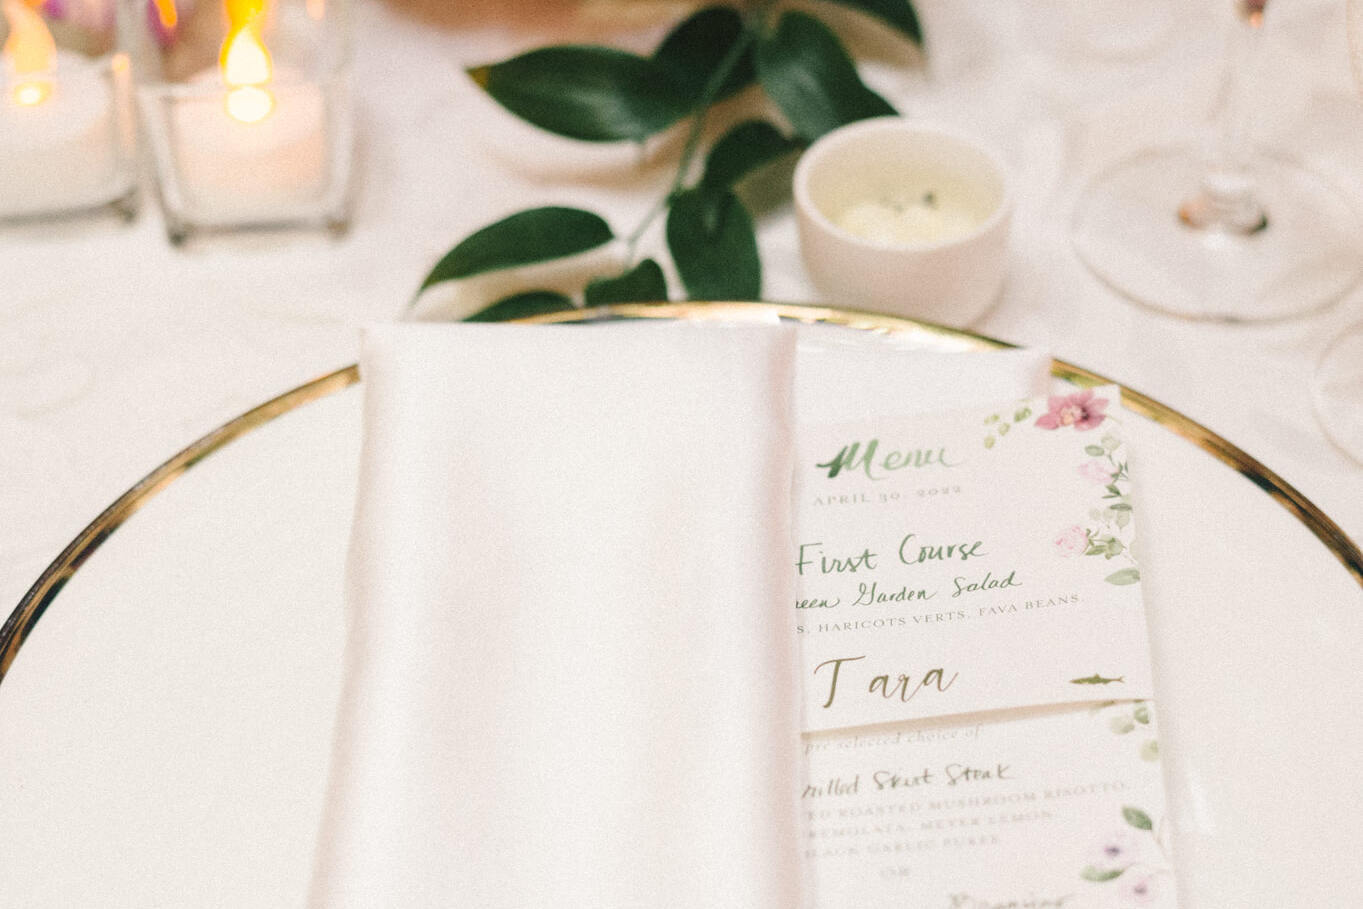 The menus at a glam, garden wedding were adorned with illustrated flowers.